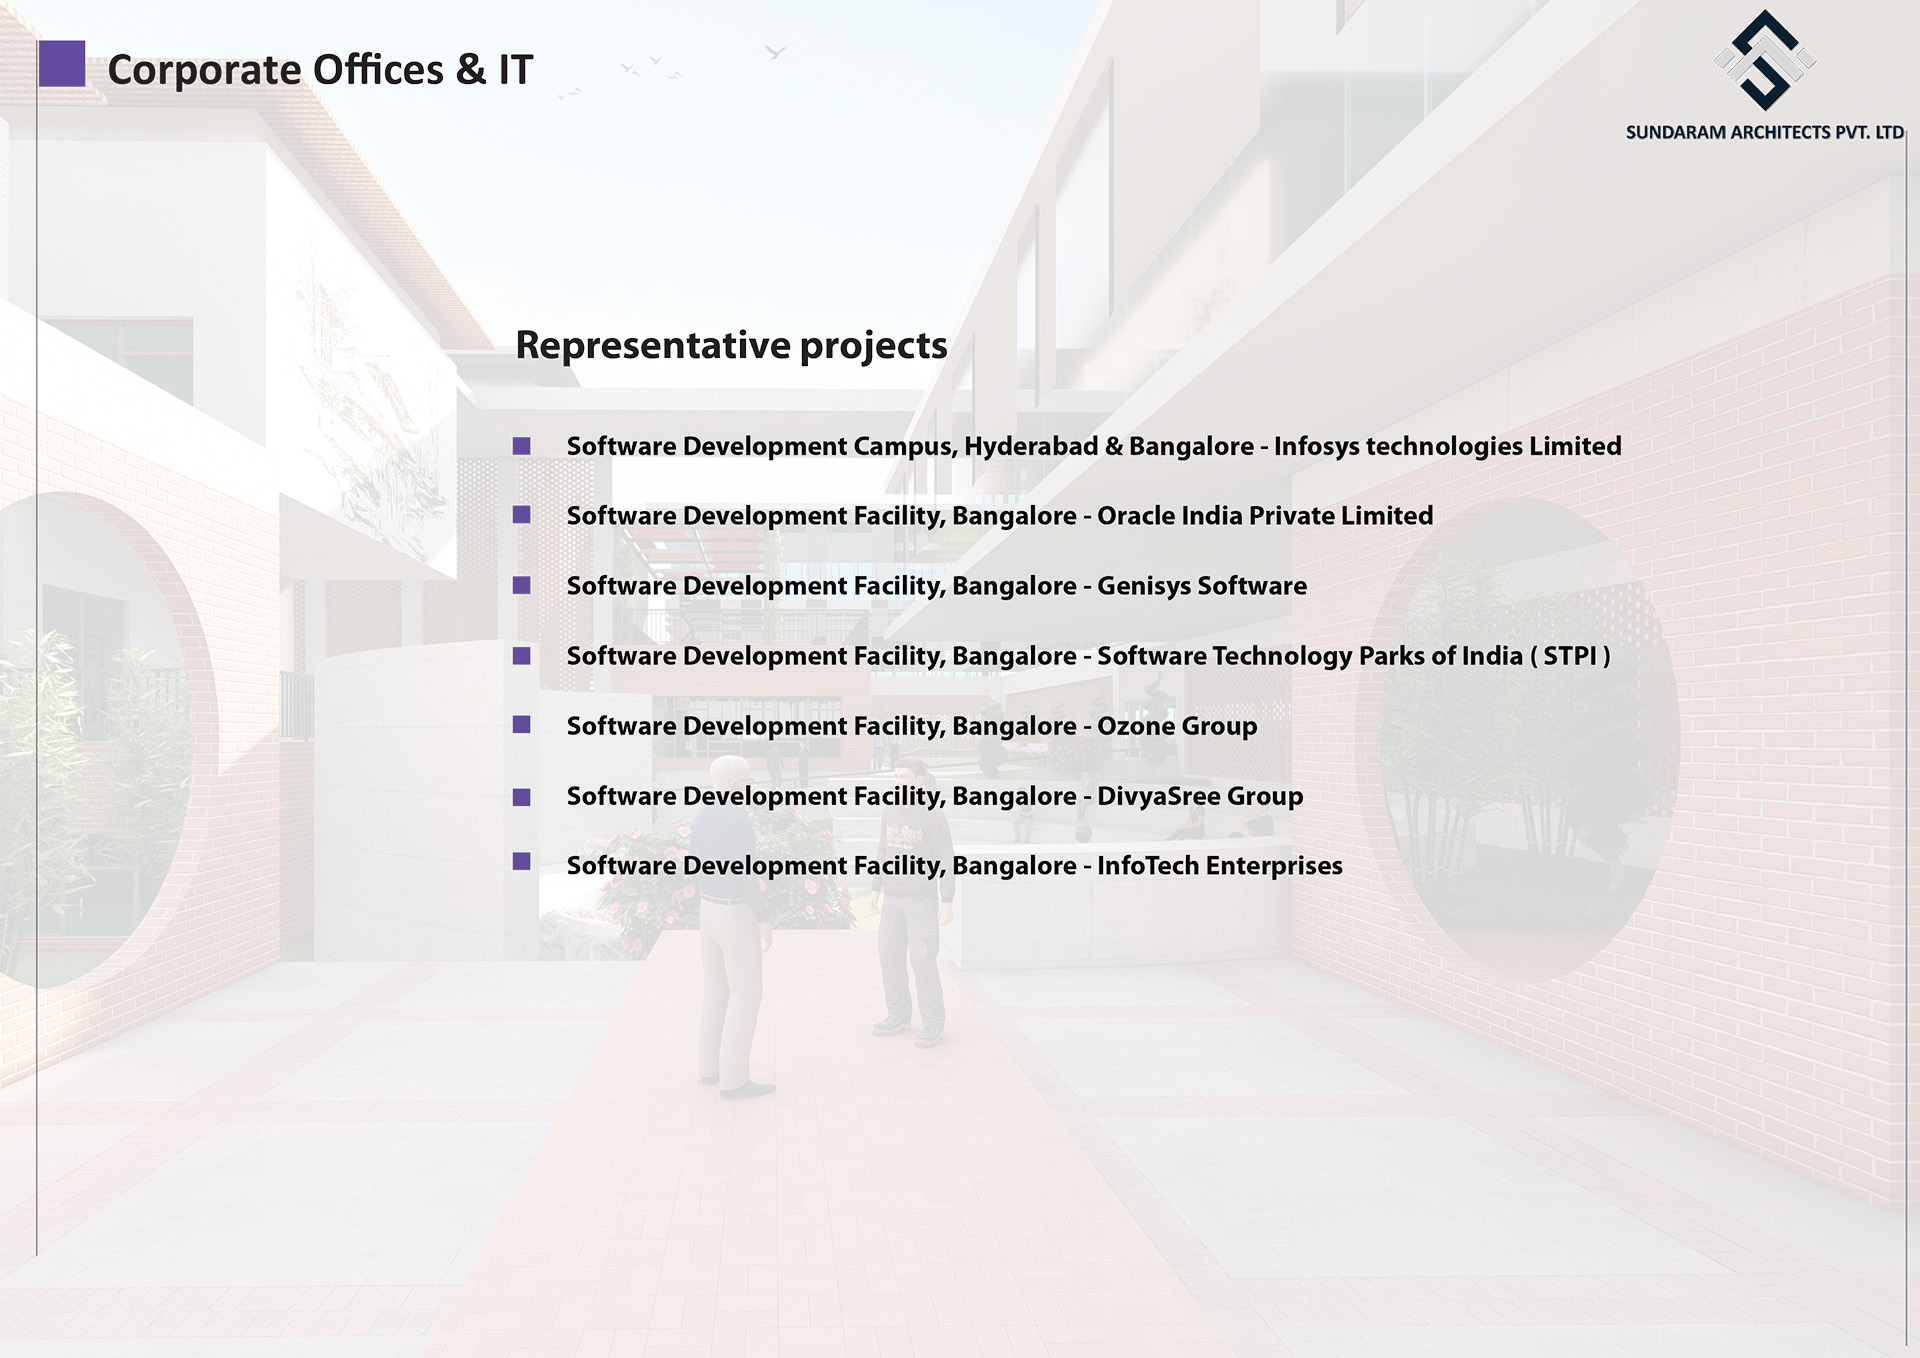 Corporate Offices & IT projects which are well designed by Sundaram Architects